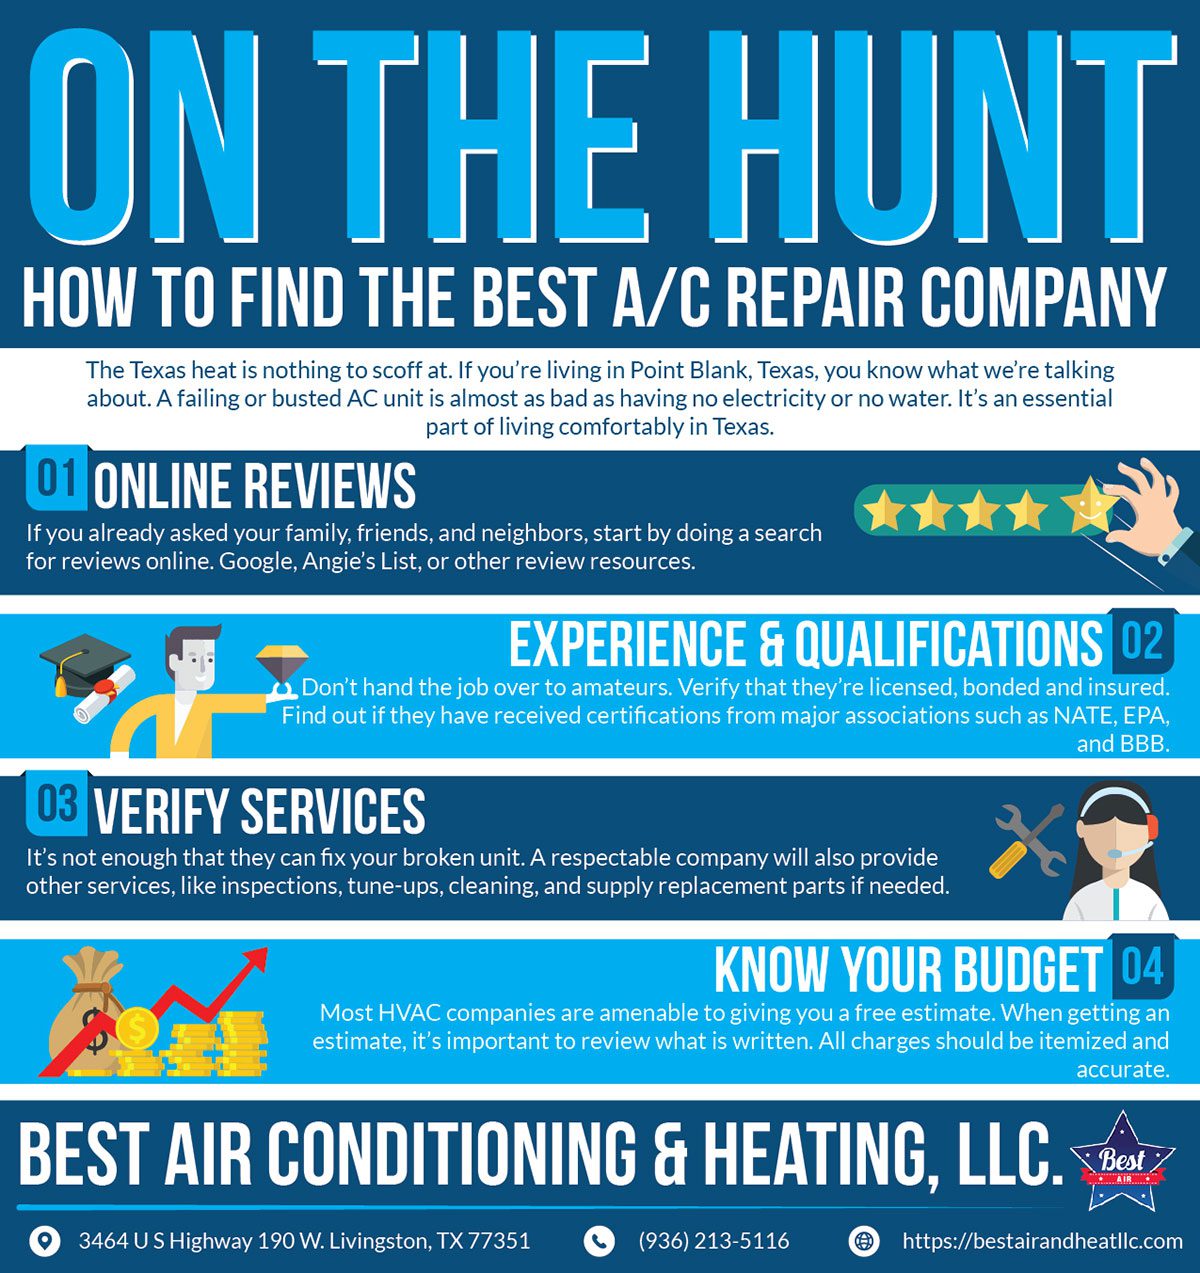 On the Hunt: How to Find the Best A/C Repair Company